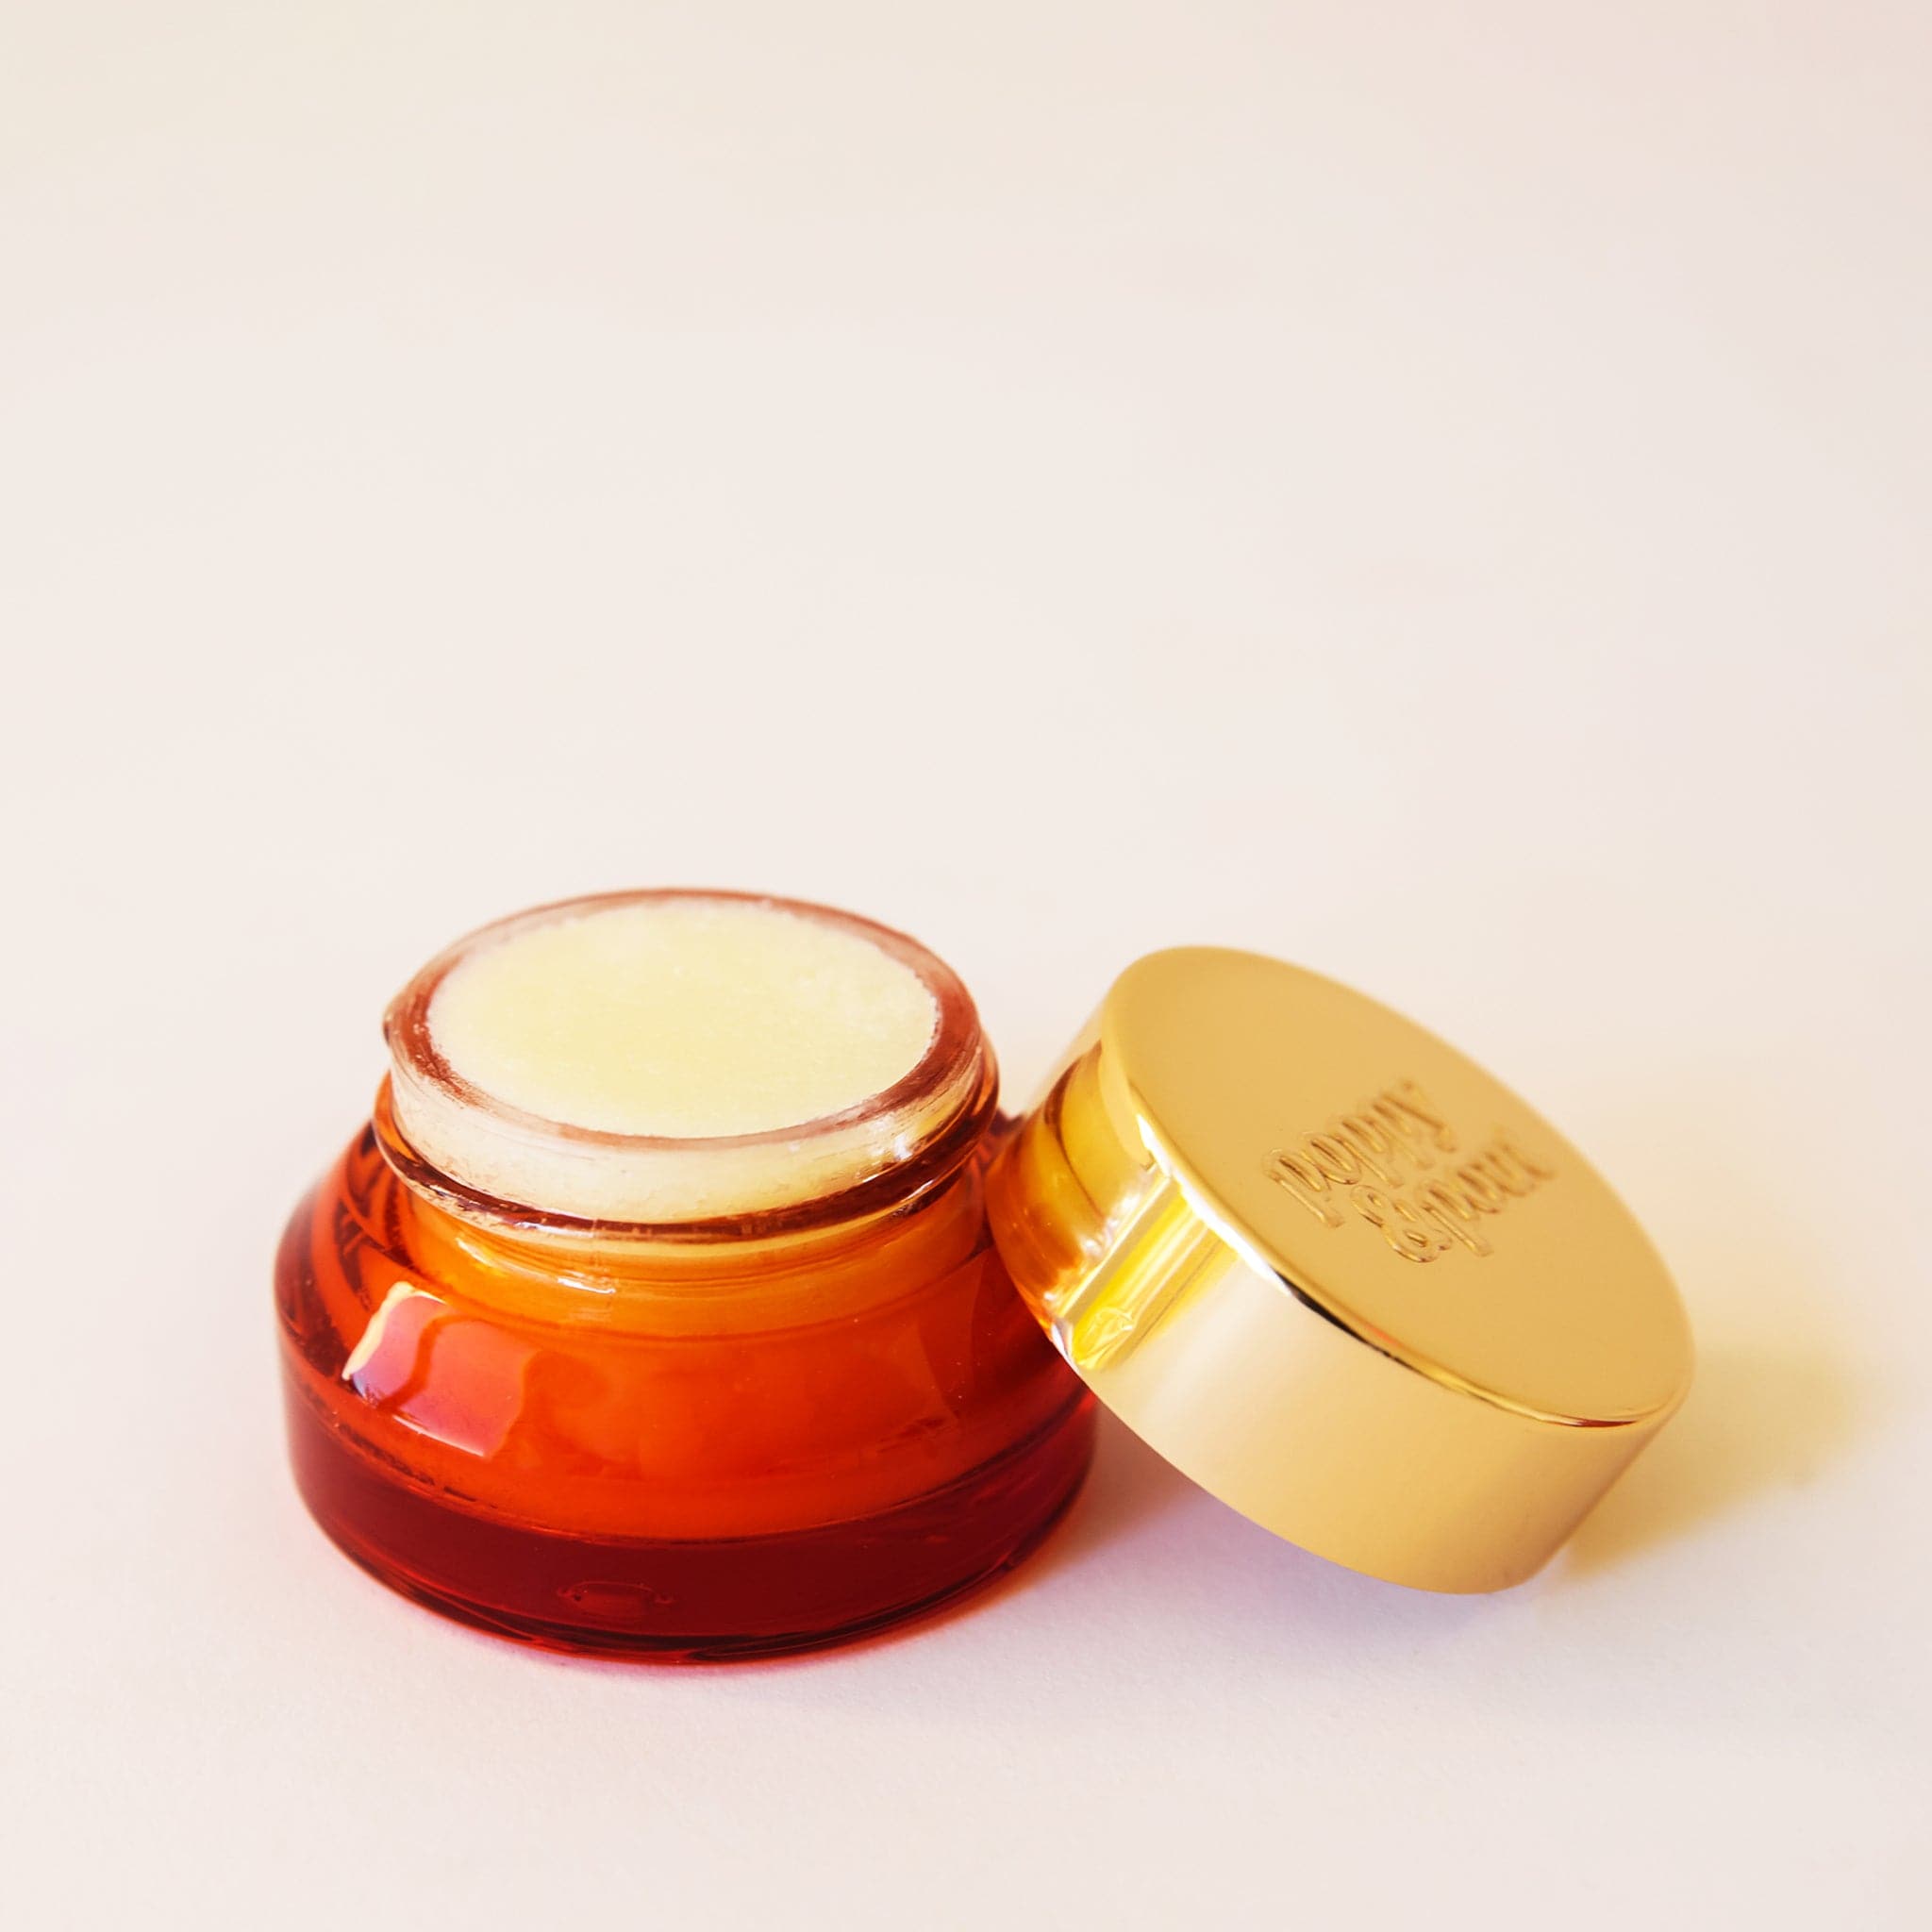 Lip scrub in a dark orange colored container with a gold lid. This lip scrub is grainy, hydrating and perfect for your lips.